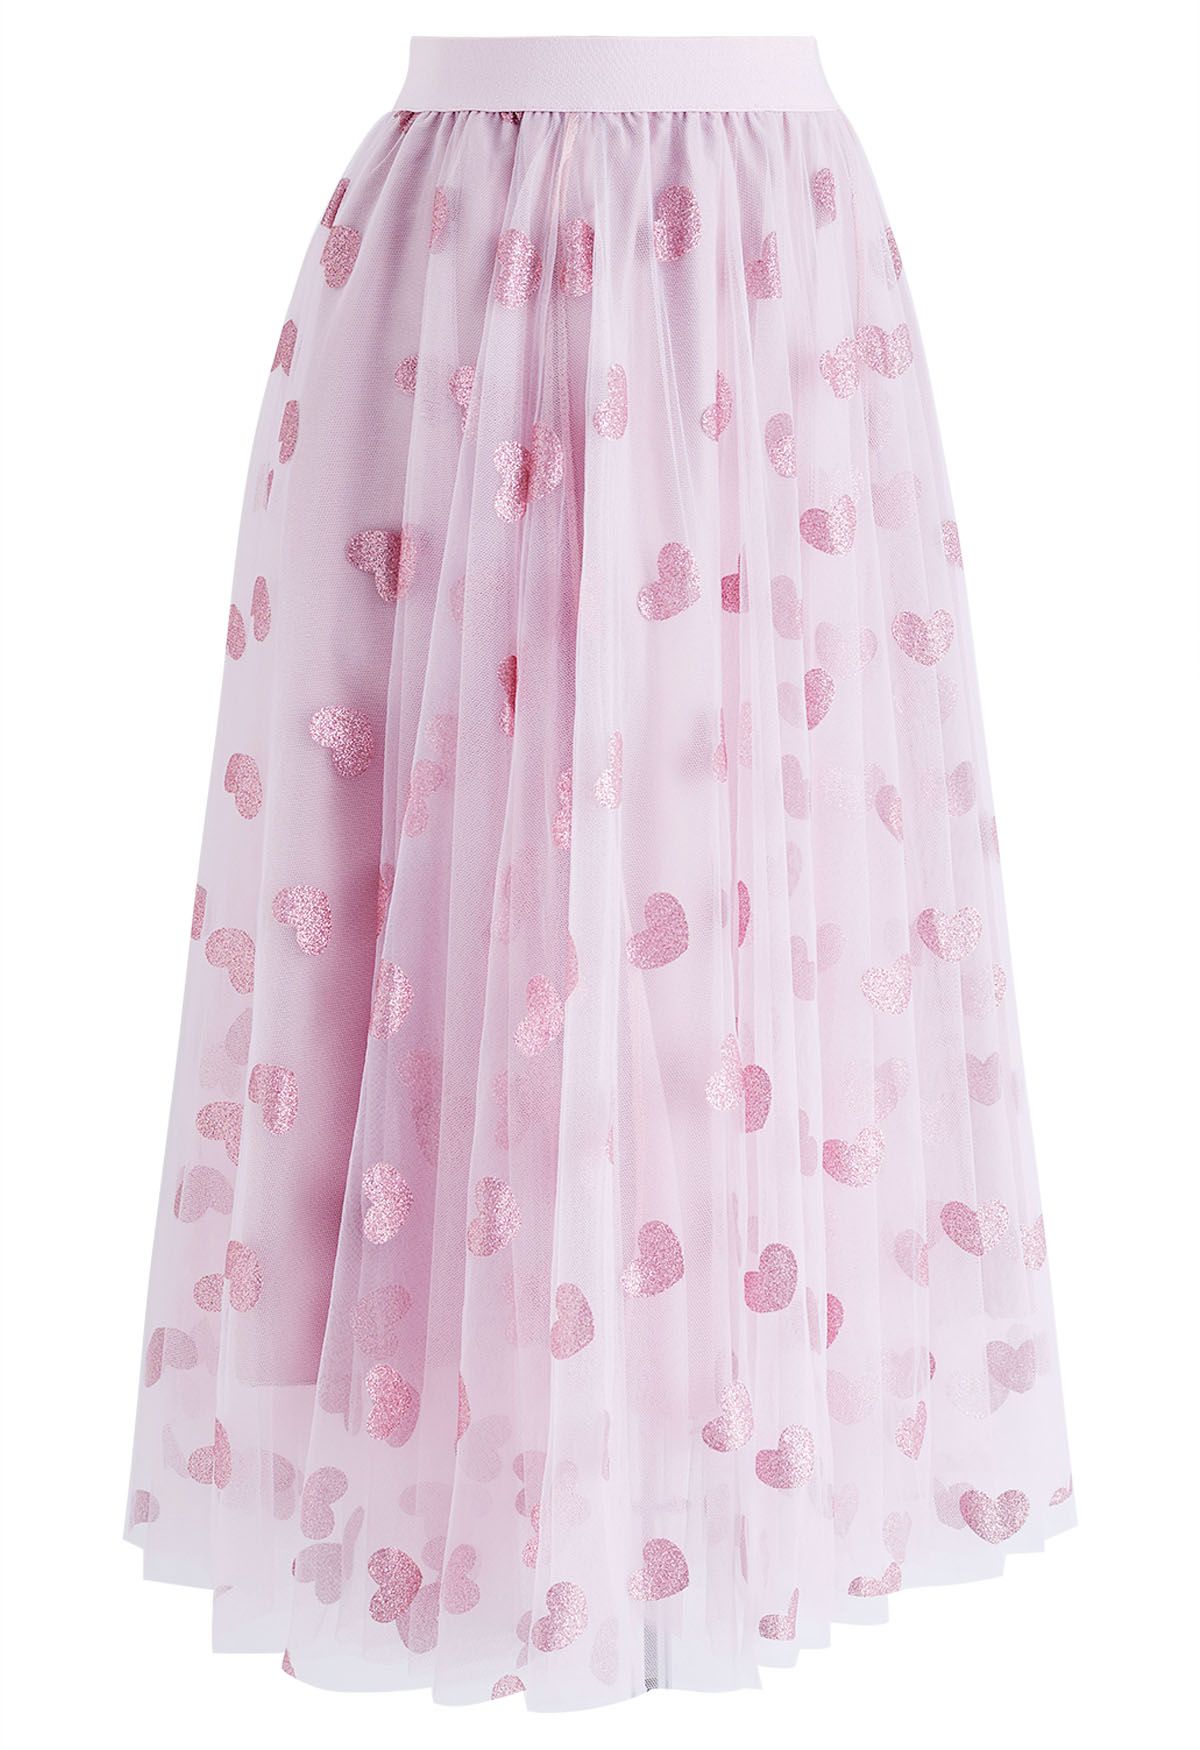 Shimmering Hearts Mesh Tulle Midi Skirt in Pink - Retro, Indie and ...